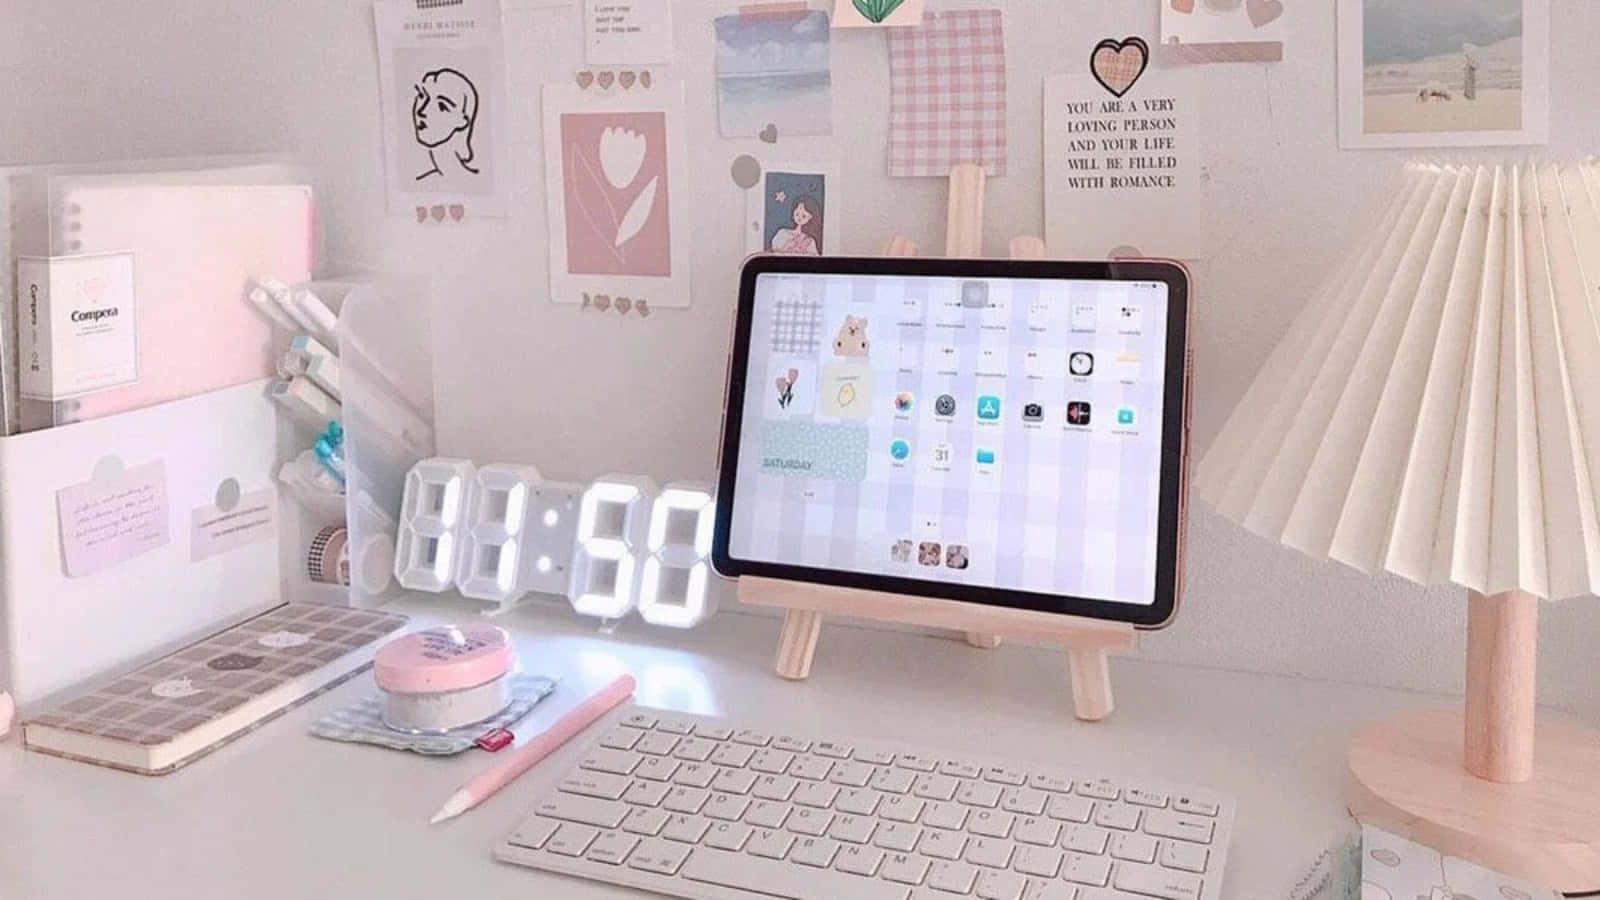 An aesthetic iPad to experience a modern workspace